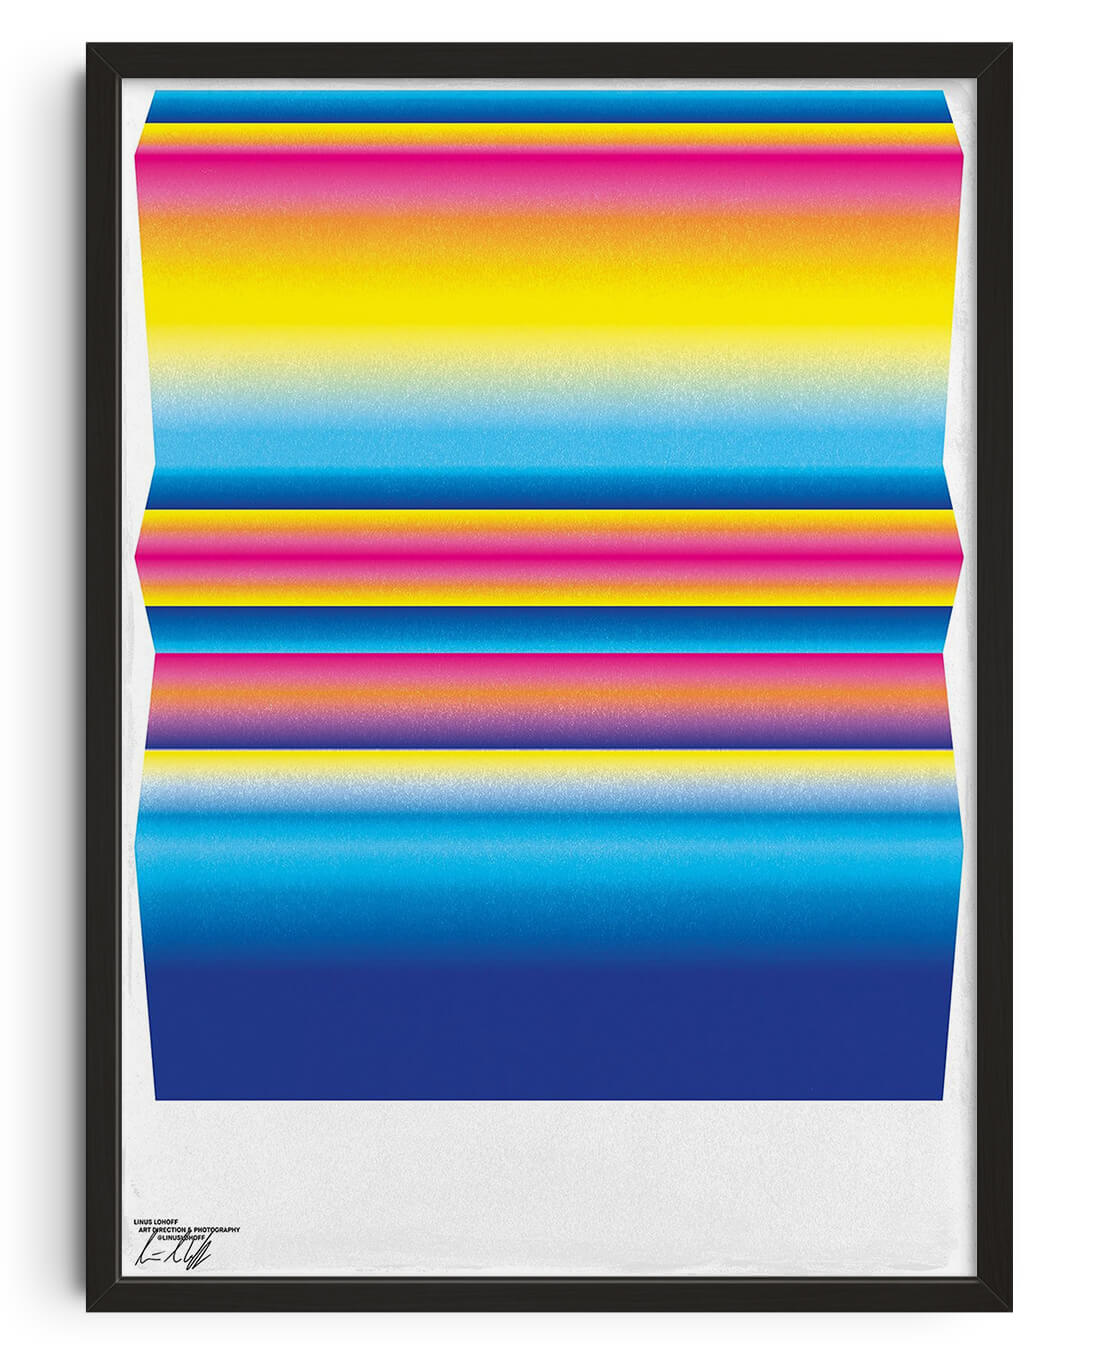 Tendency by Linus Lohoff contemporary wall art print from DROOL